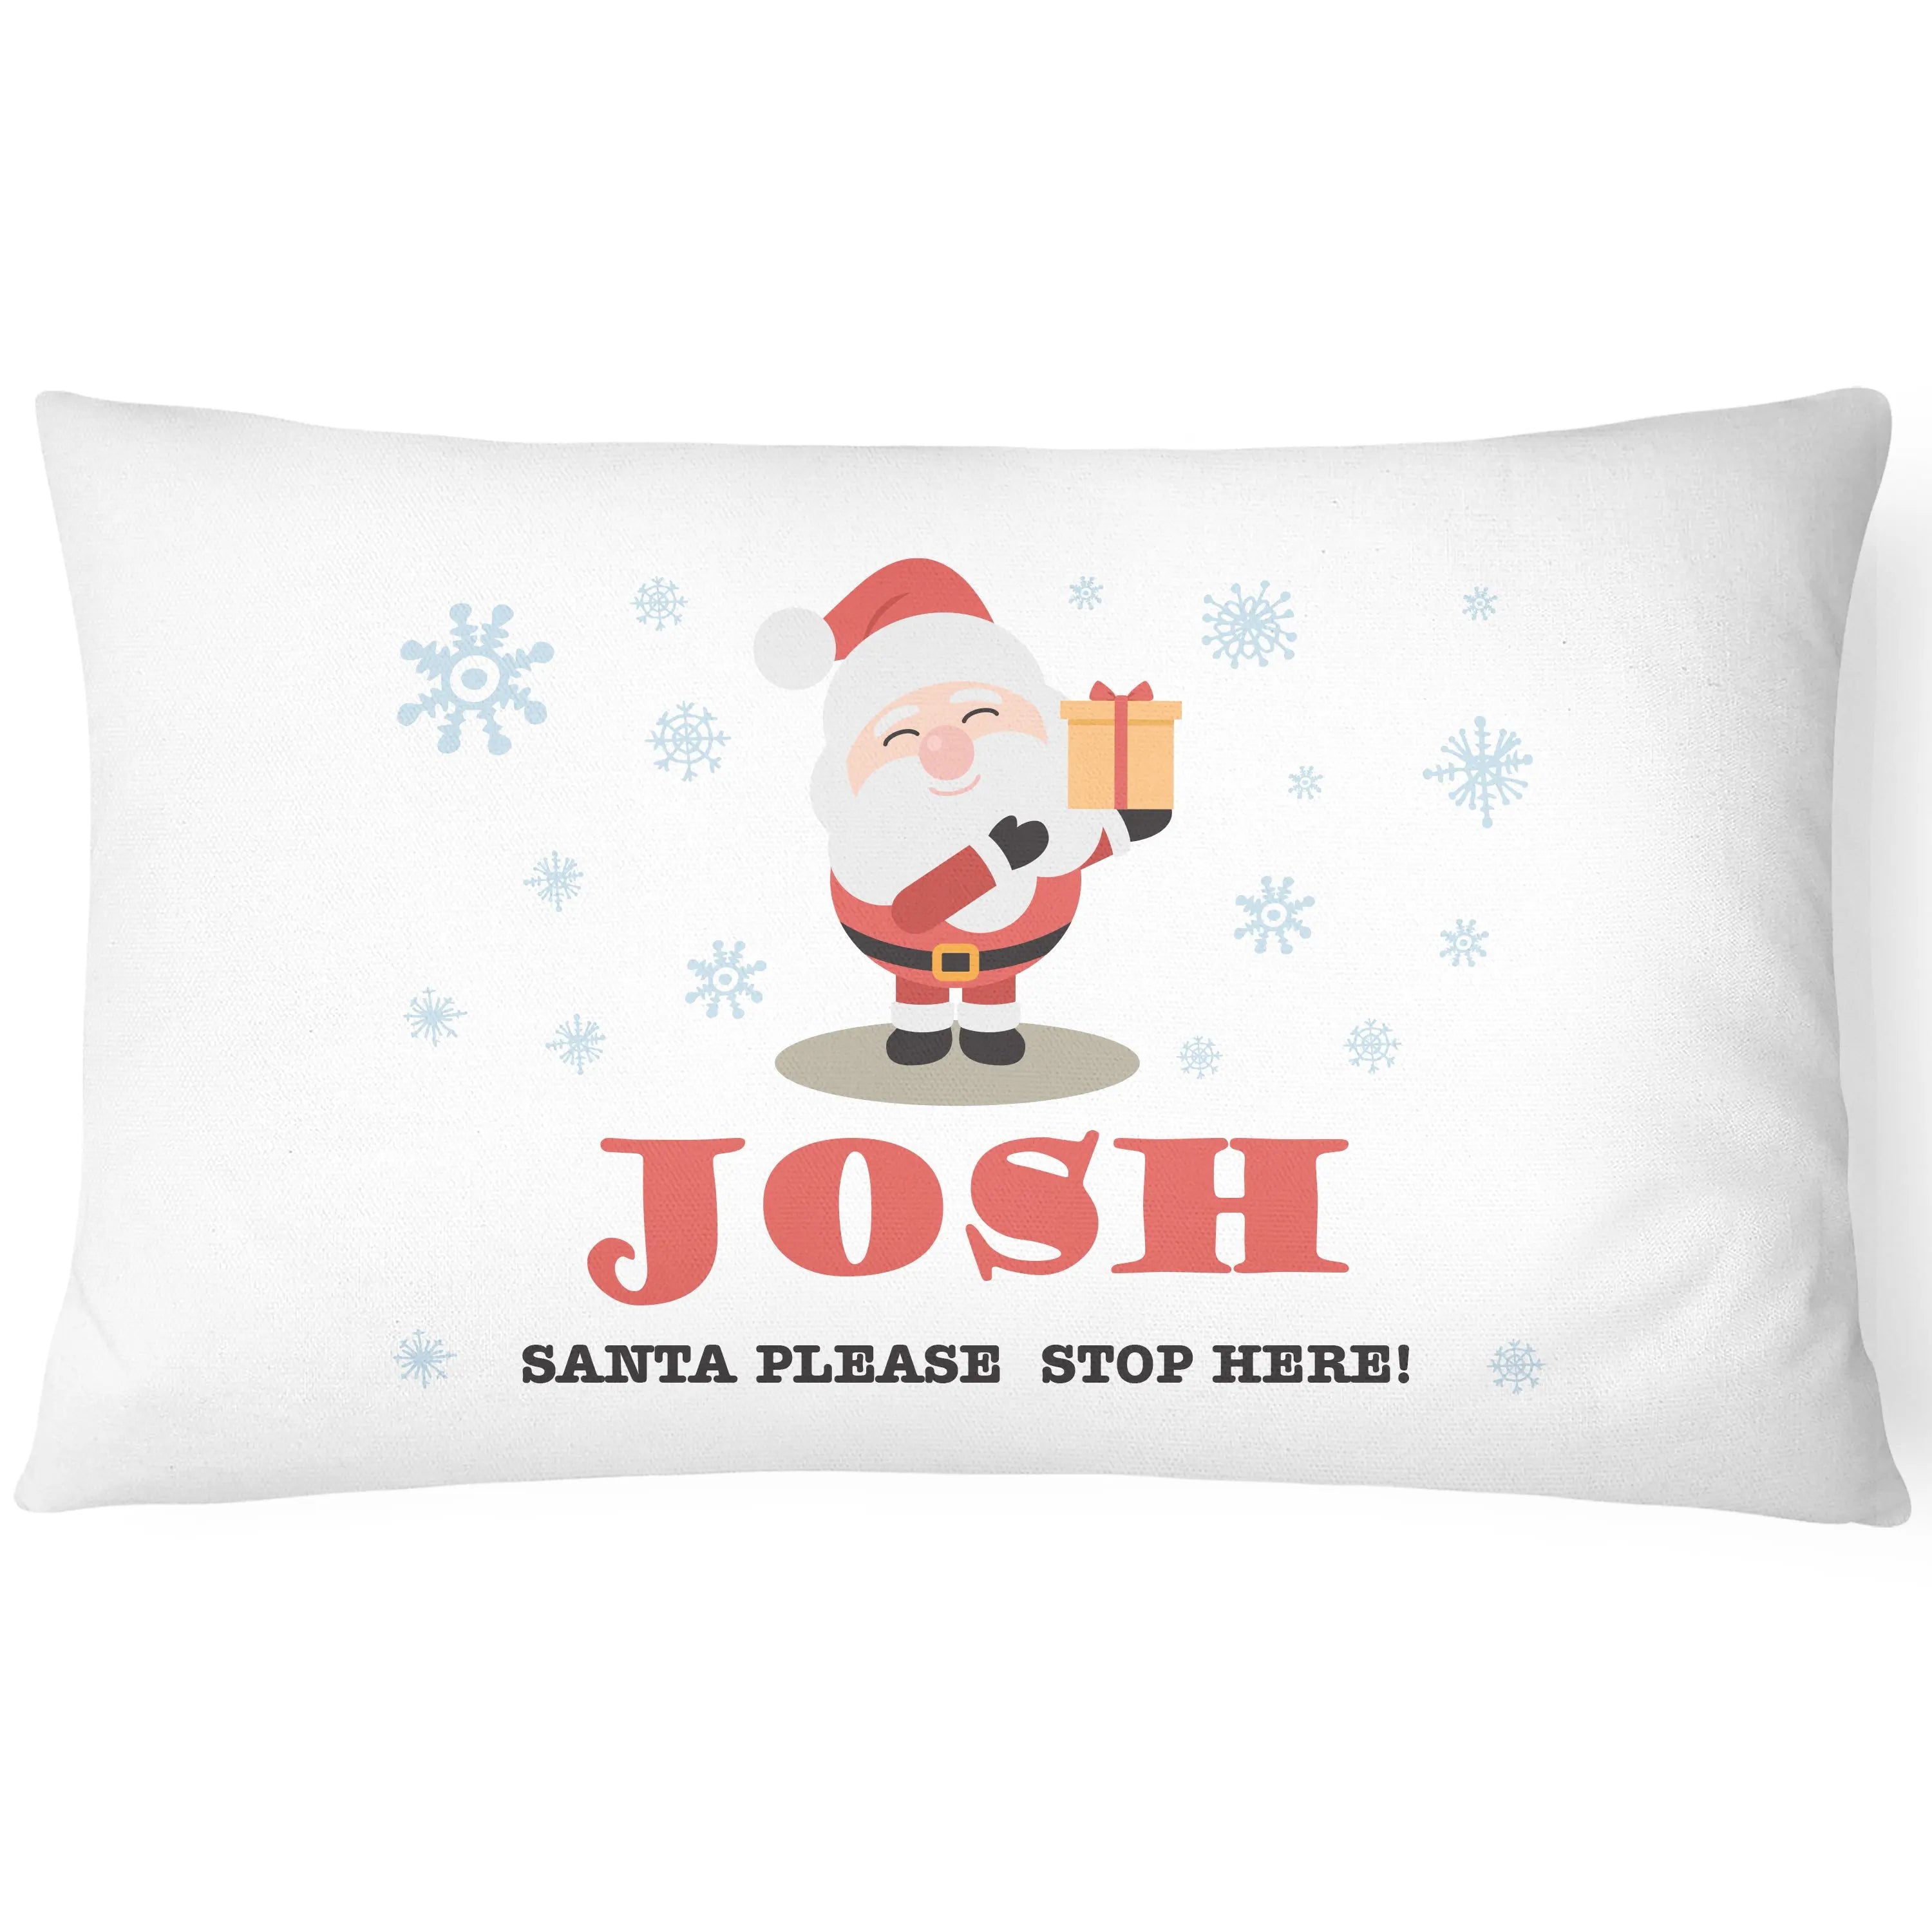 Christmas Pillowcase for Kids - Personalise With Any Name - Perfect Children's Gift - Santa - CushionPop